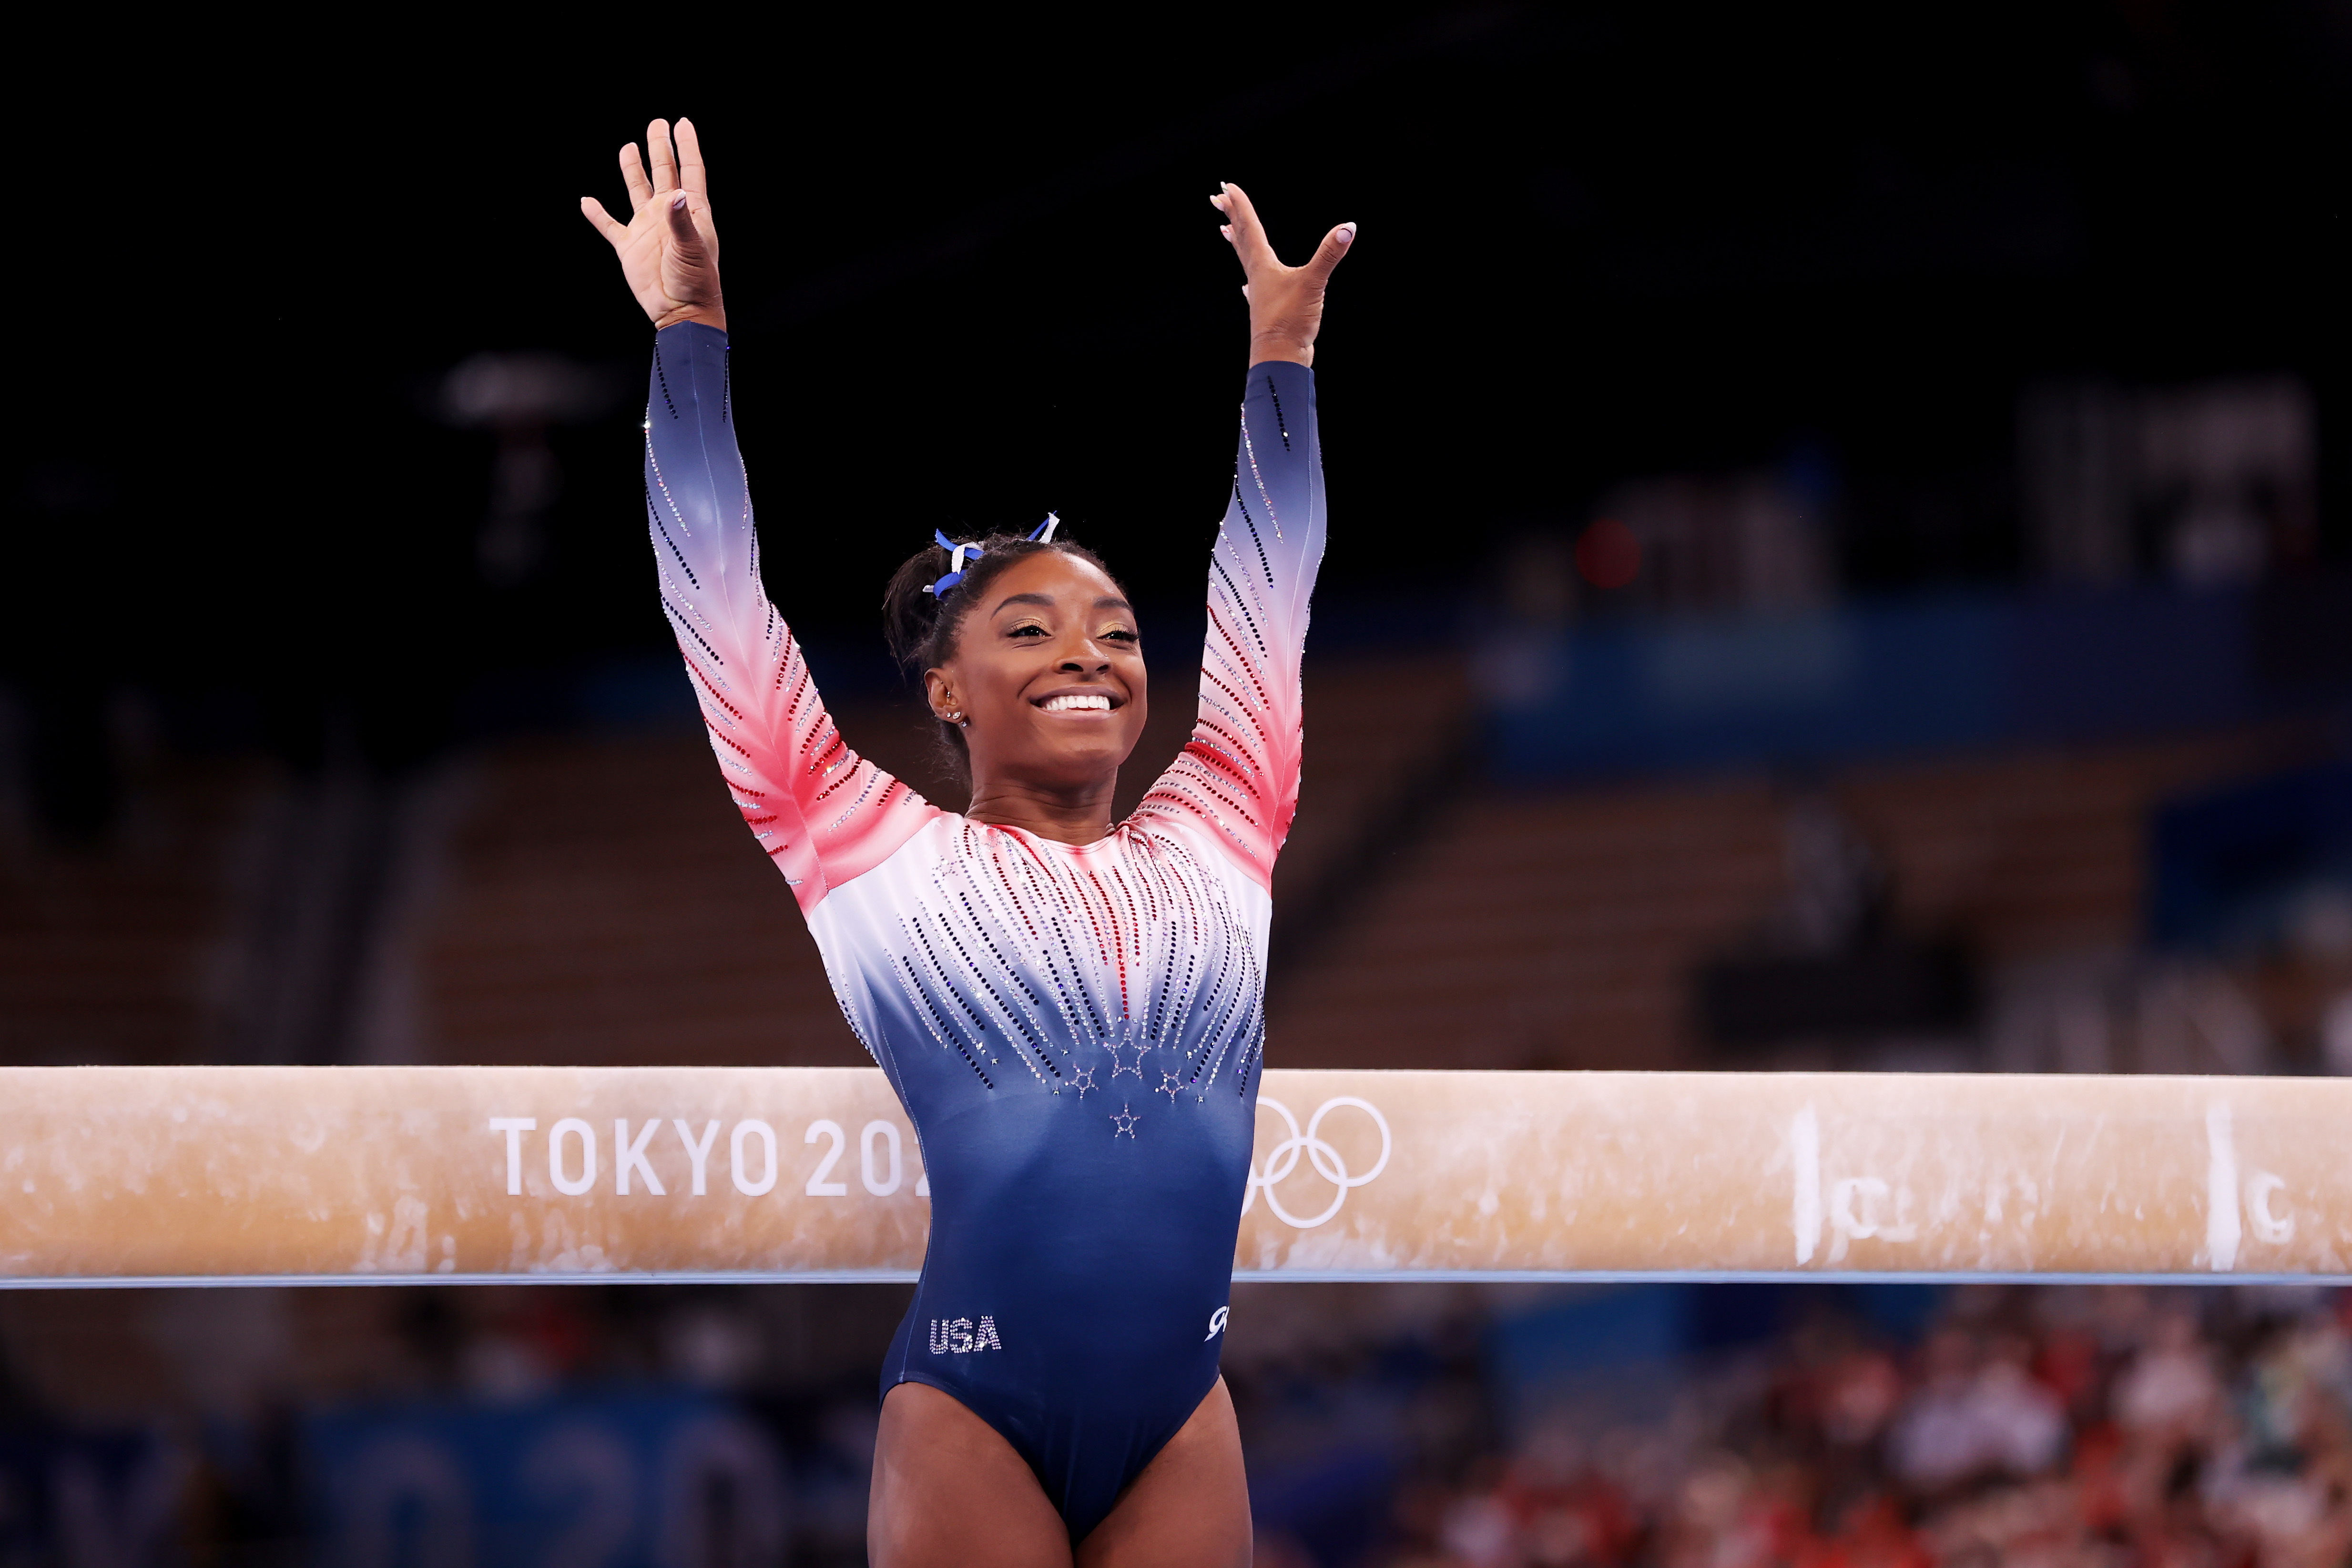 Simone Biles at Ariake Gymnastics Centre on, August 3, 2021, in Tokyo, Japan | Source: Getty Images